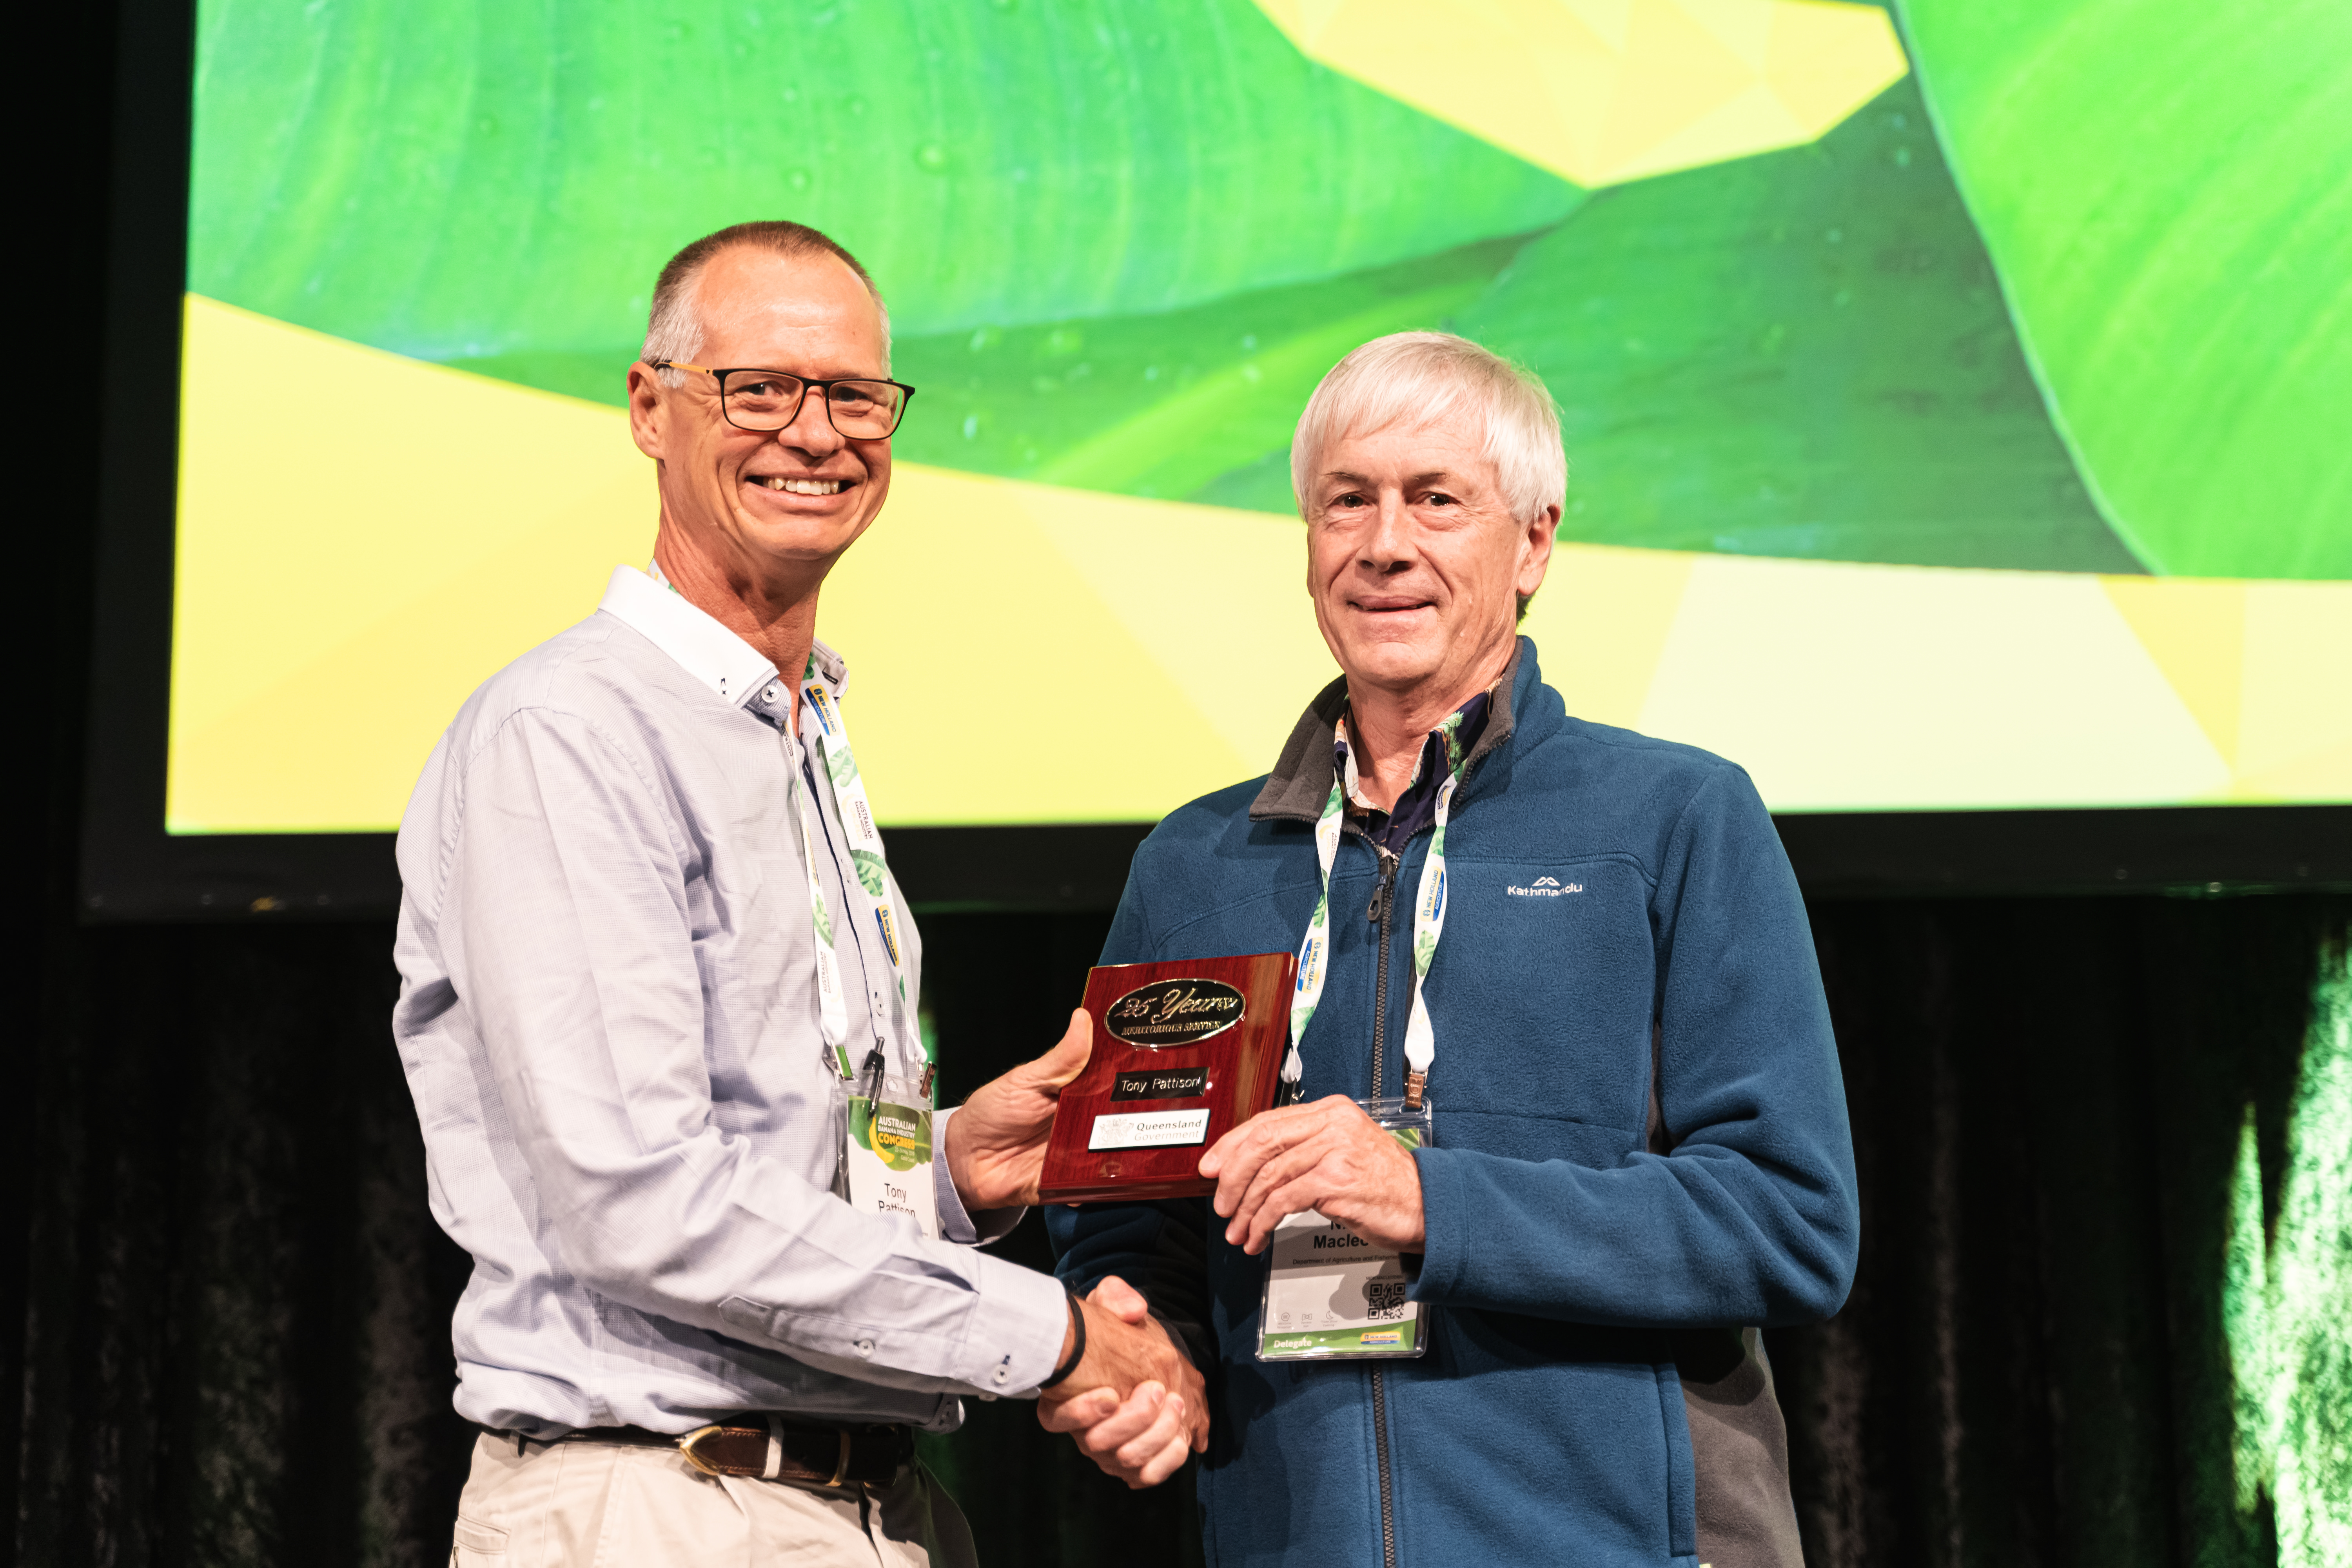 Tony Pattison (pictured left) received recognition
of 25 years of service to DAF at this year’s
Australian Banana Industry Congress, presented
with a plague by Acting General Manager, Crop &
Food Science, Agri-Science Queensland DAF
Nick Macleod.